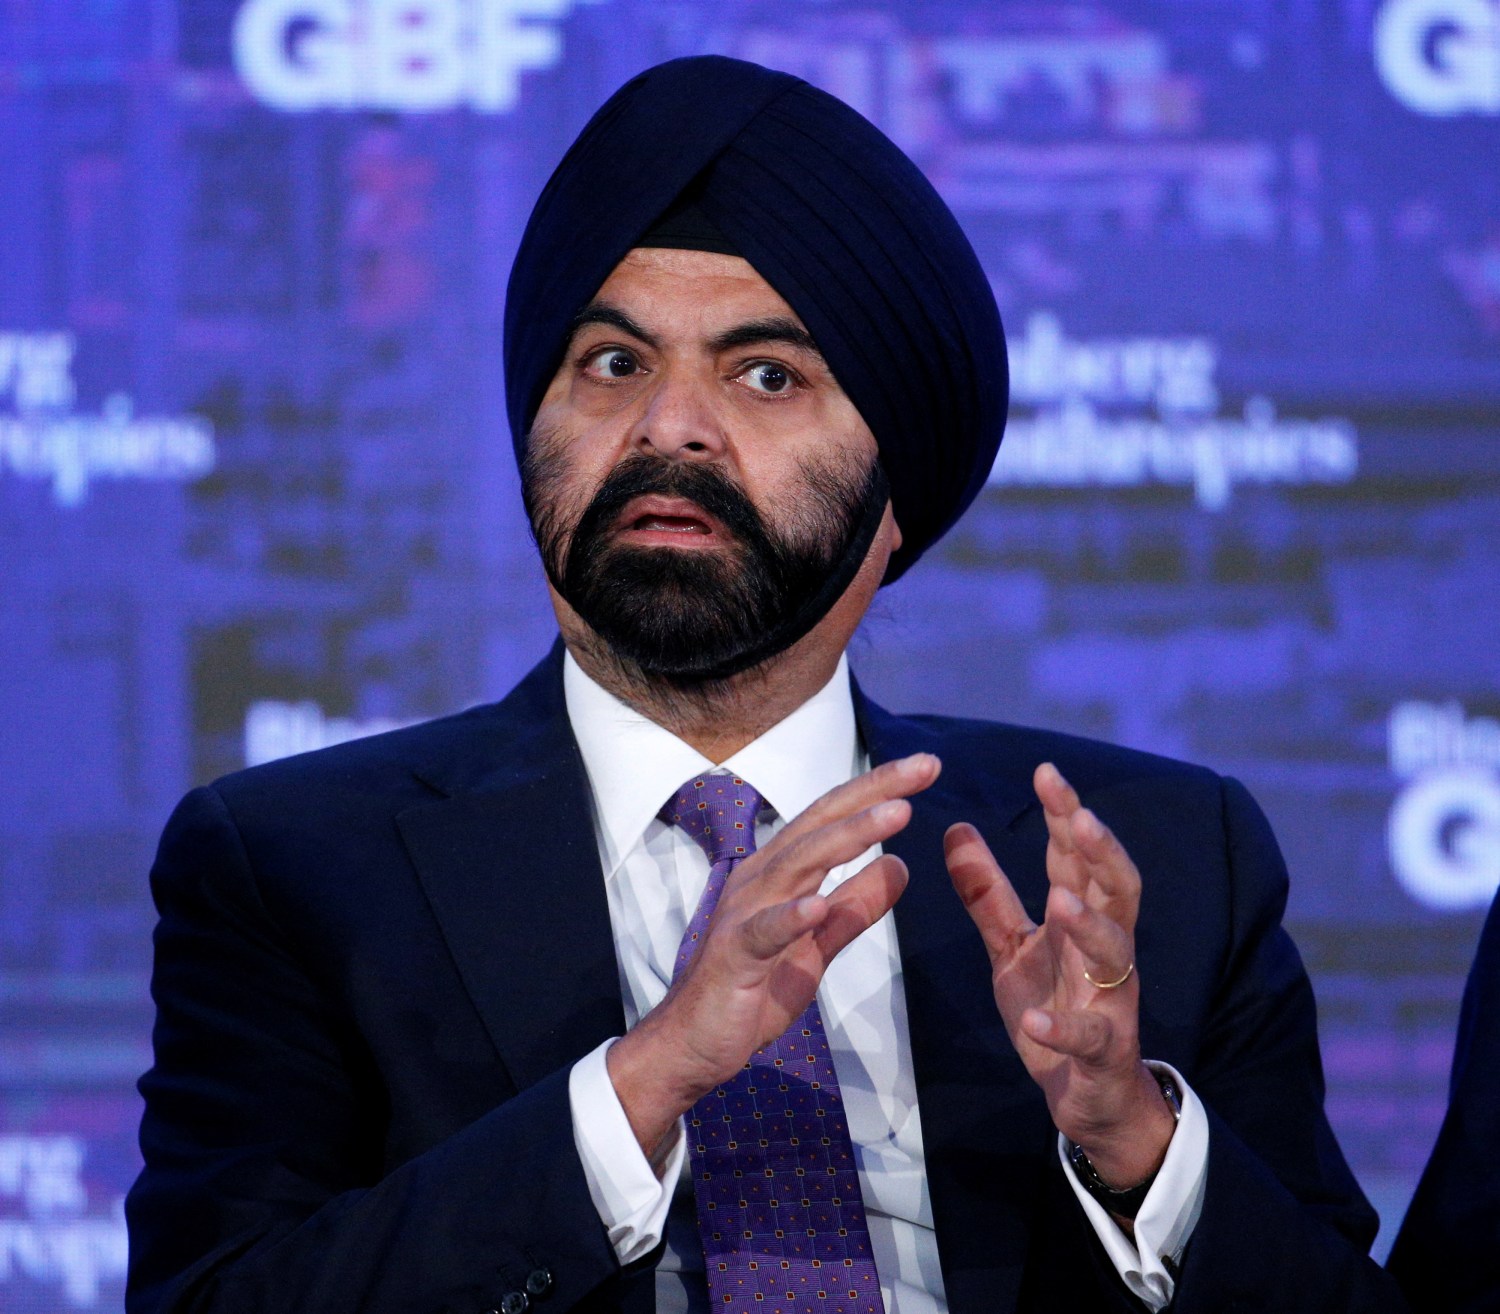 FILE PHOTO: Mastercard President and CEO Ajay Banga speaks at the Bloomberg Global Business Forum in New York, U.S., September 20, 2017. REUTERS/Brendan McDermid/File Photo